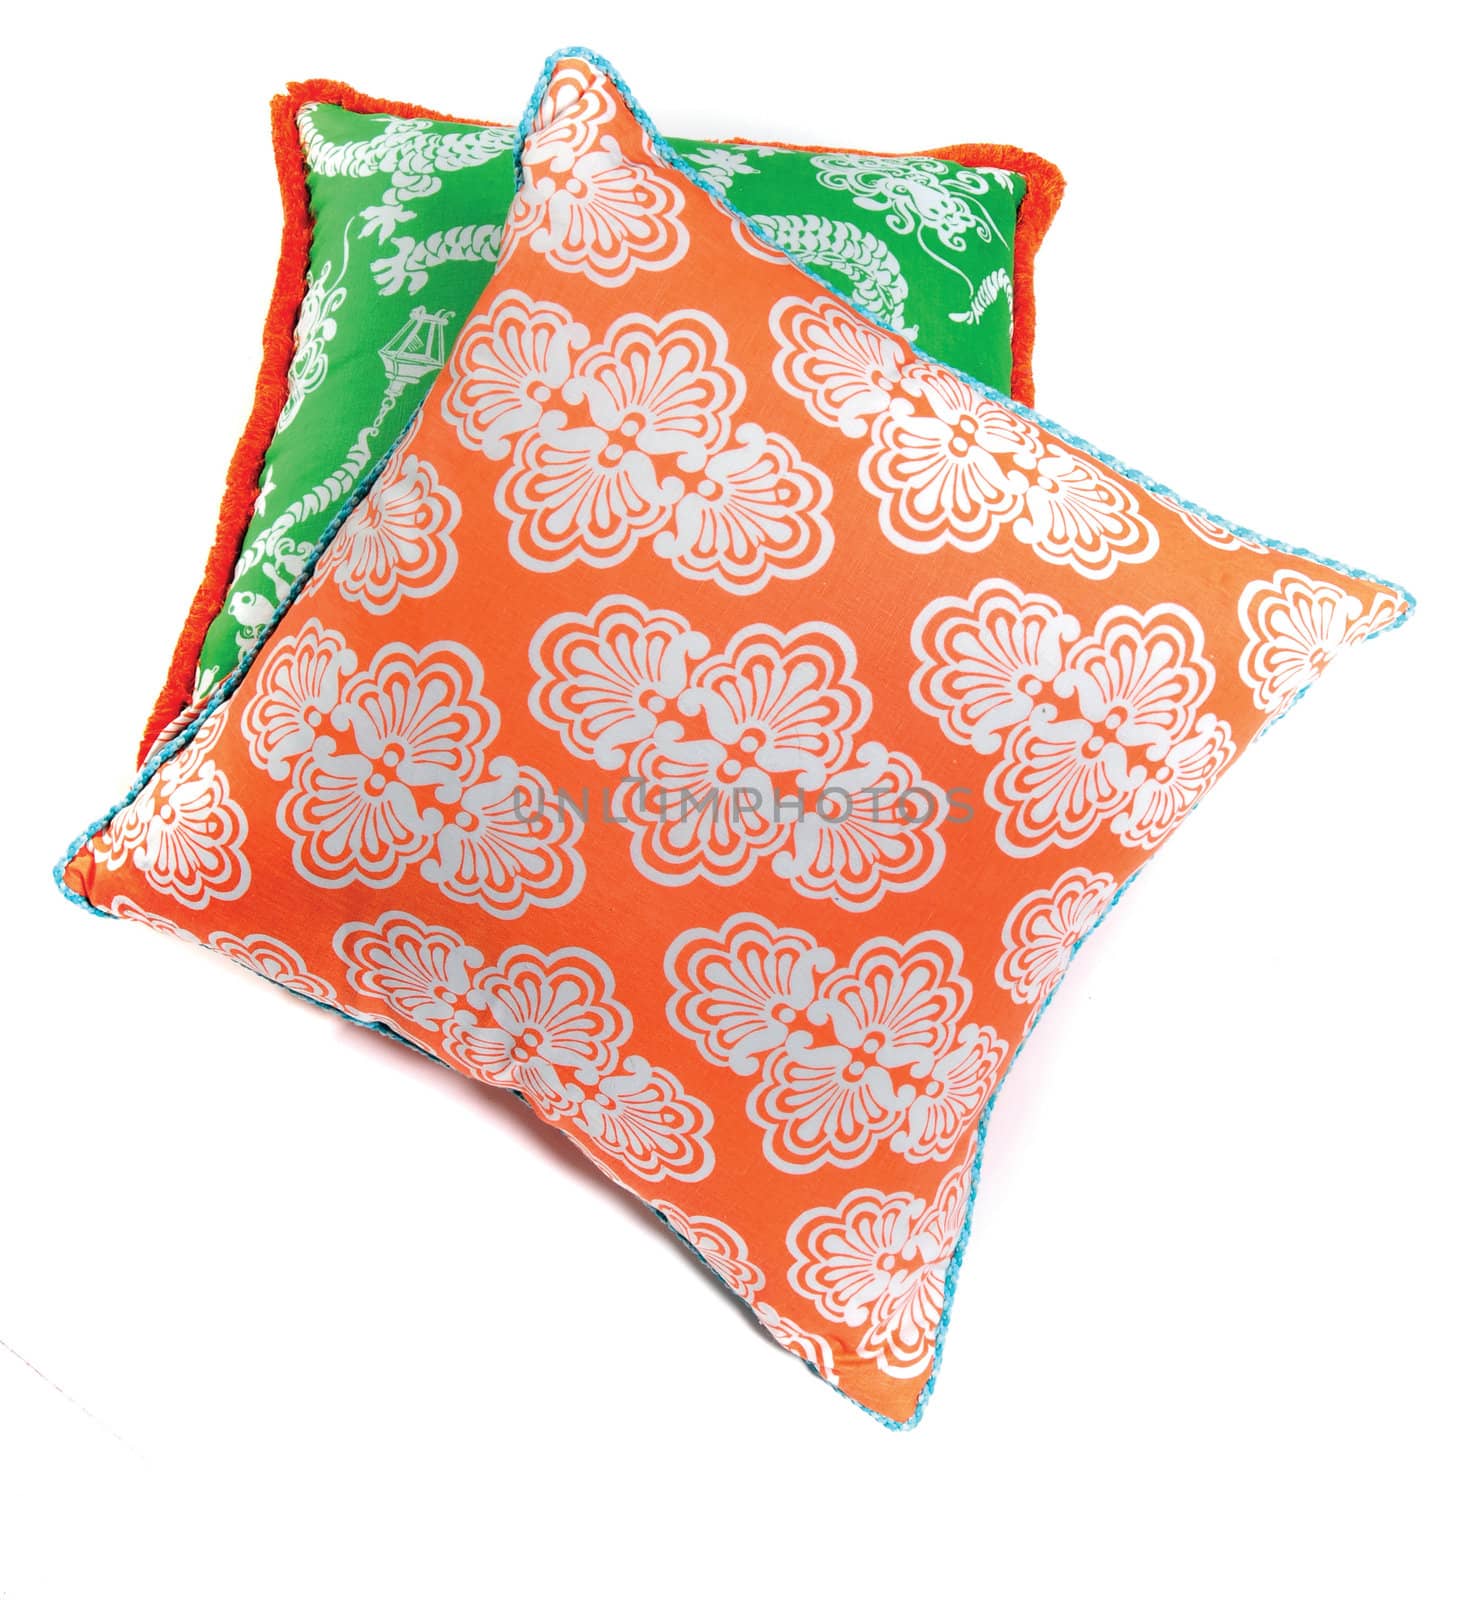 decorative orange and green pillows isolated on white background